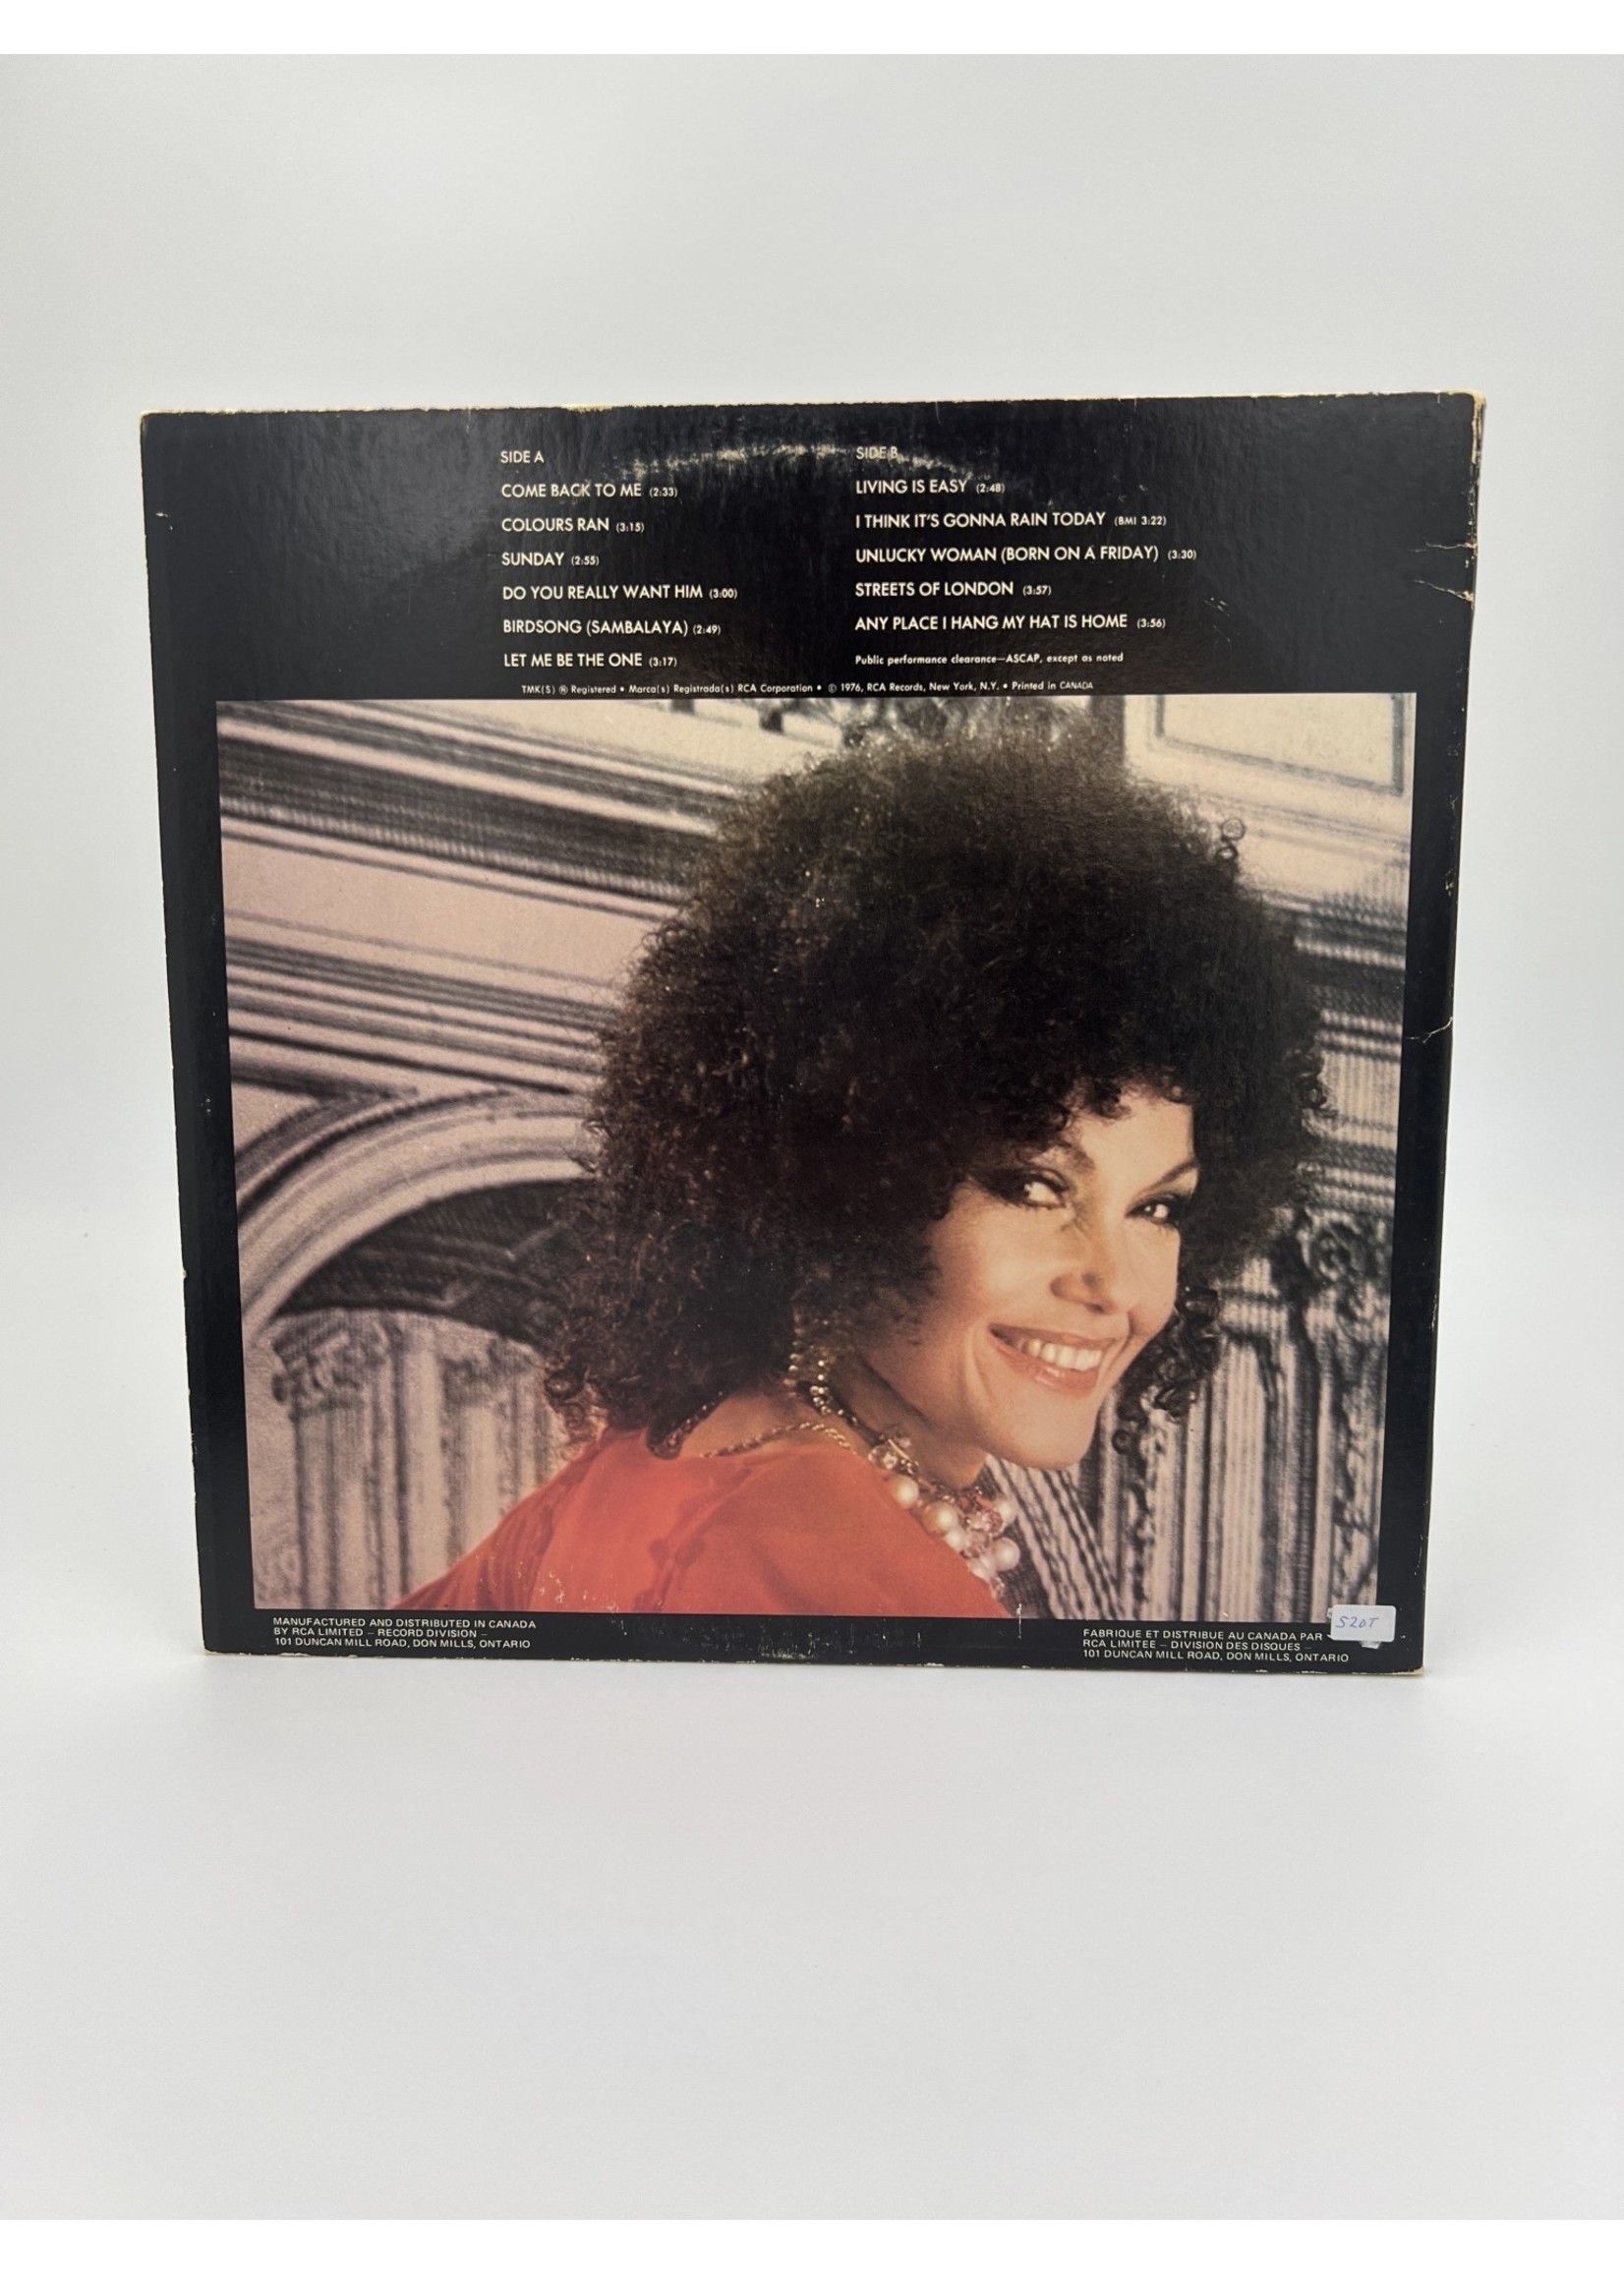 LP Cleo Laine Born On A Friday LP RECORD